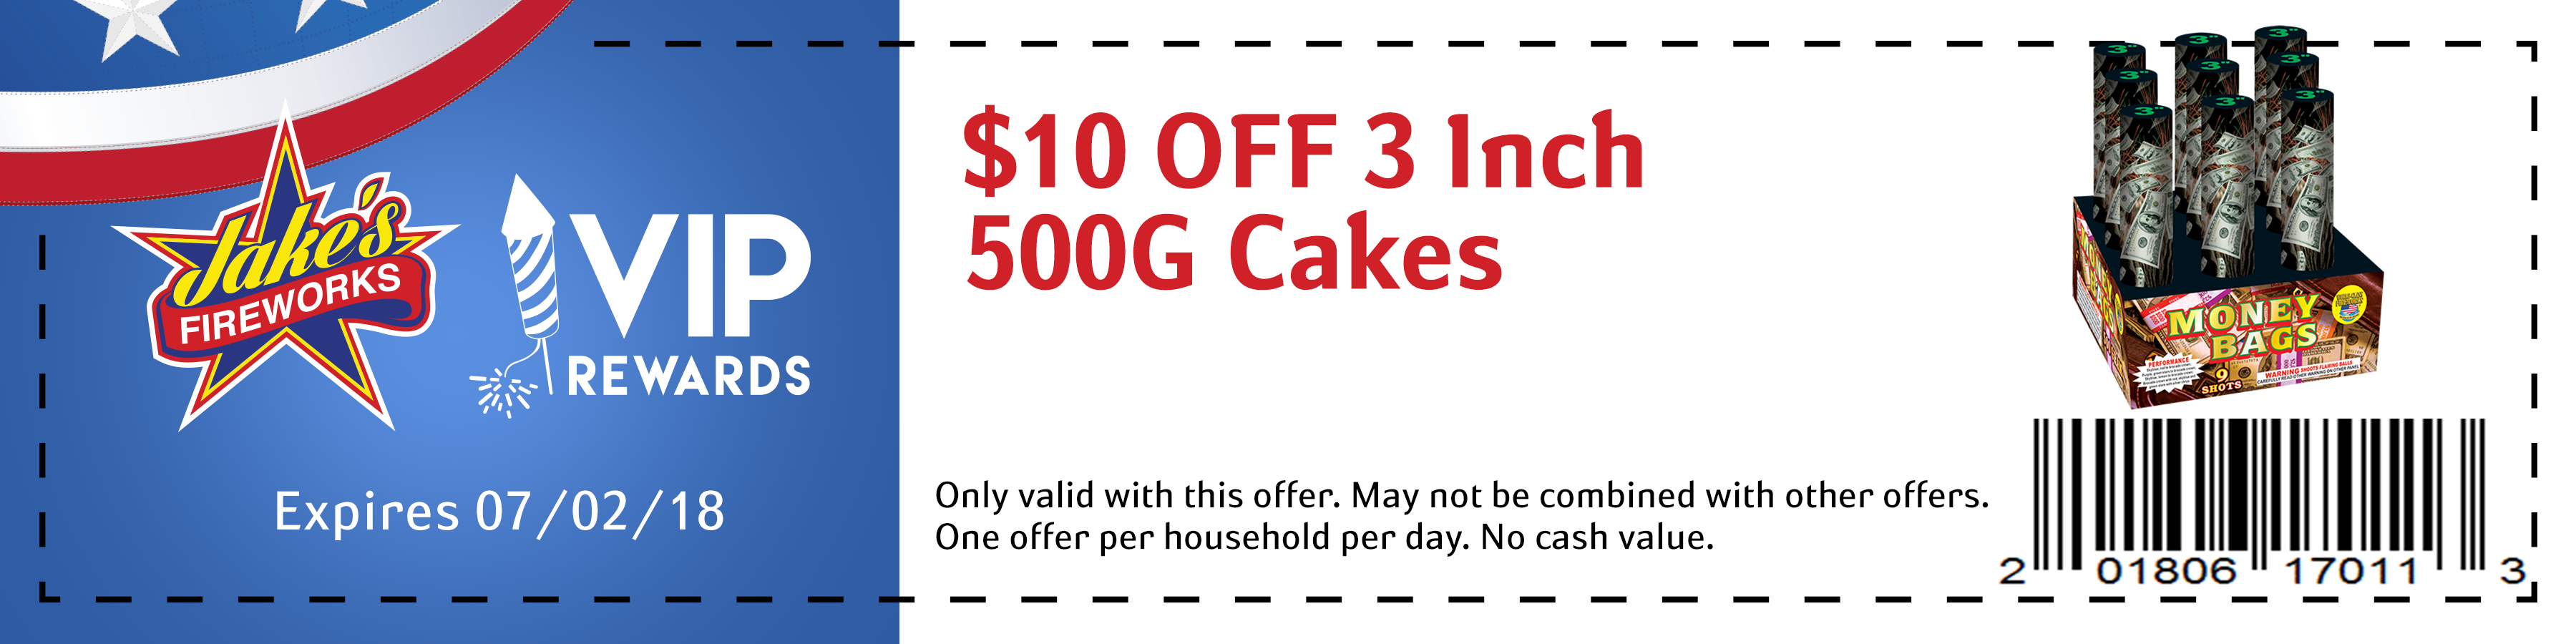 JF-3in500GCakes-10off